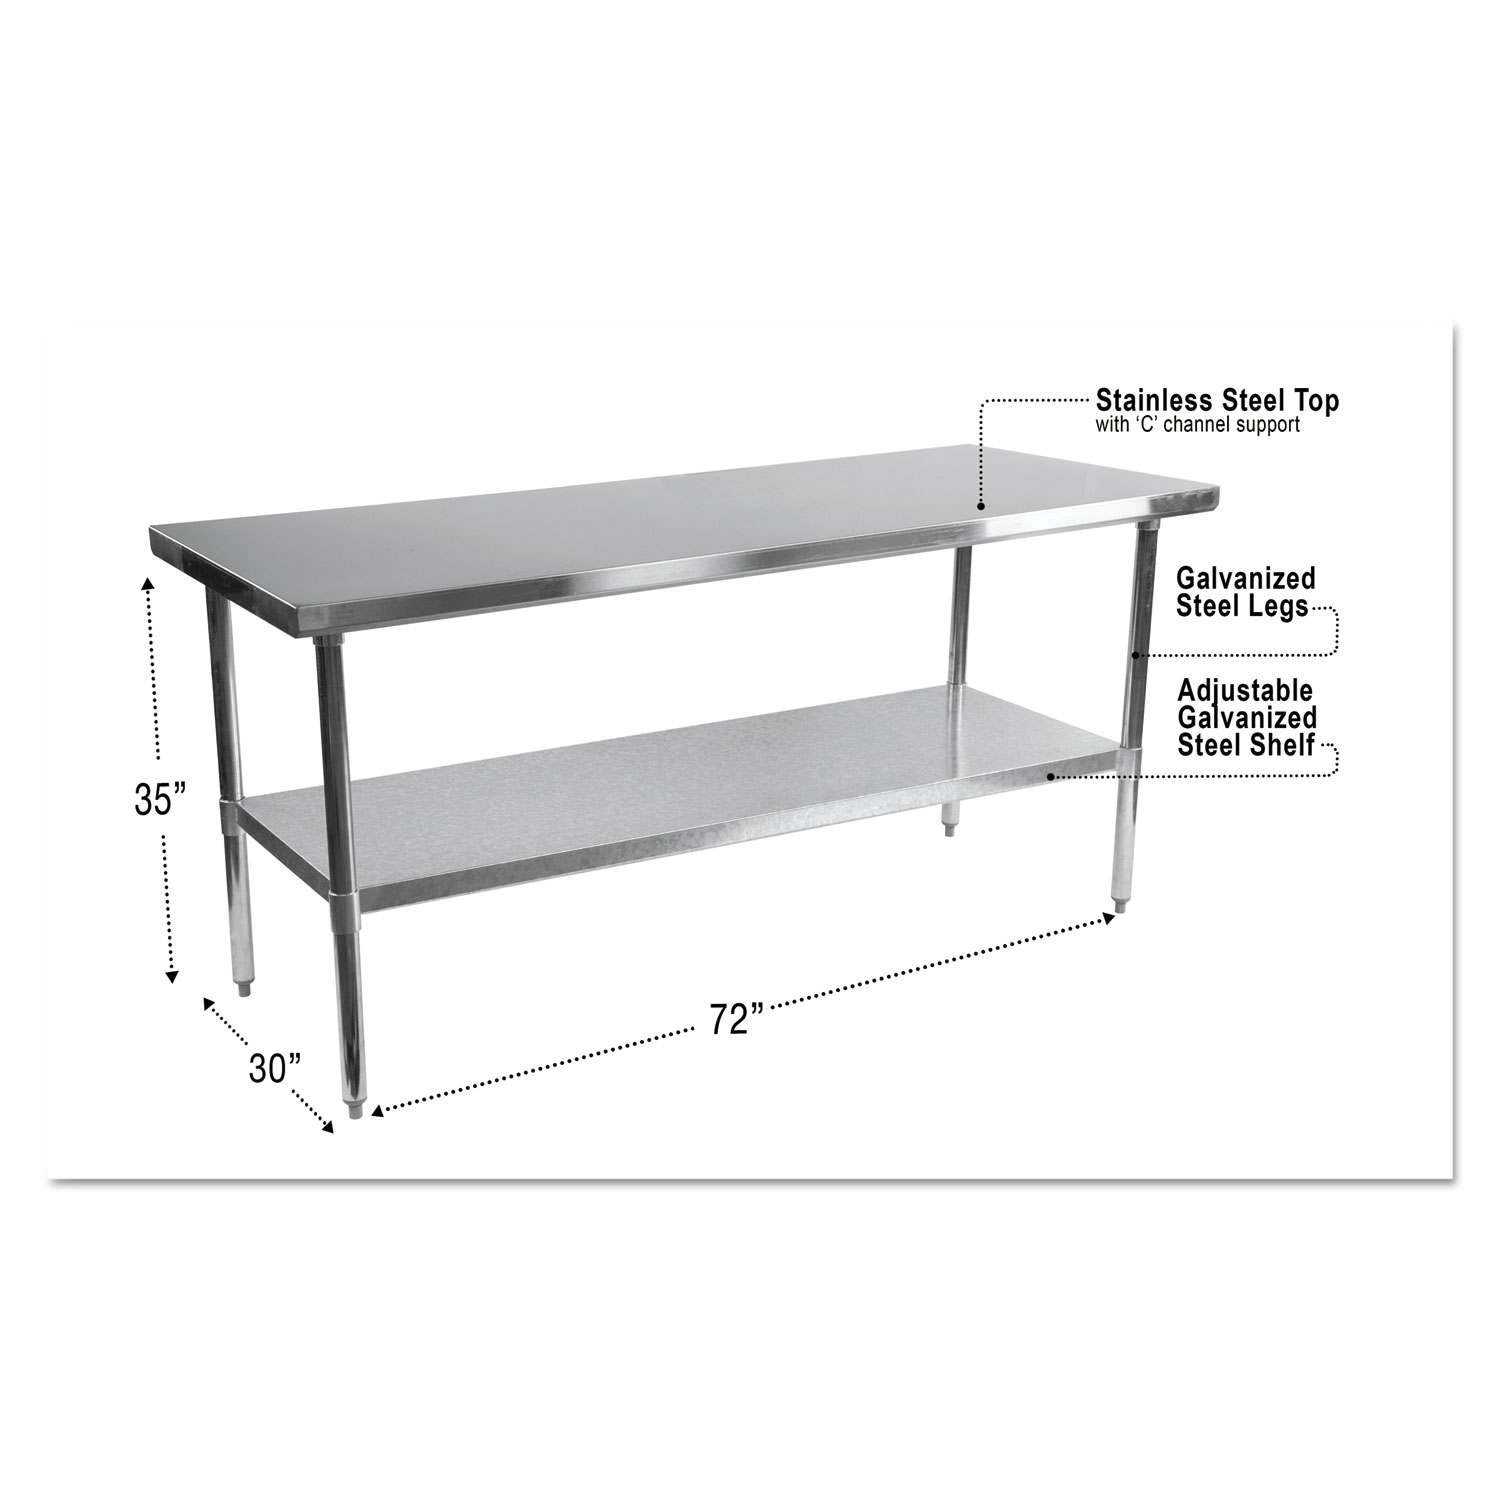  Alera ALEXS7230 NSF Approved Stainless Steel Foodservice Prep Table, 72 x 30 x 35, Silver (ALEXS7230) 